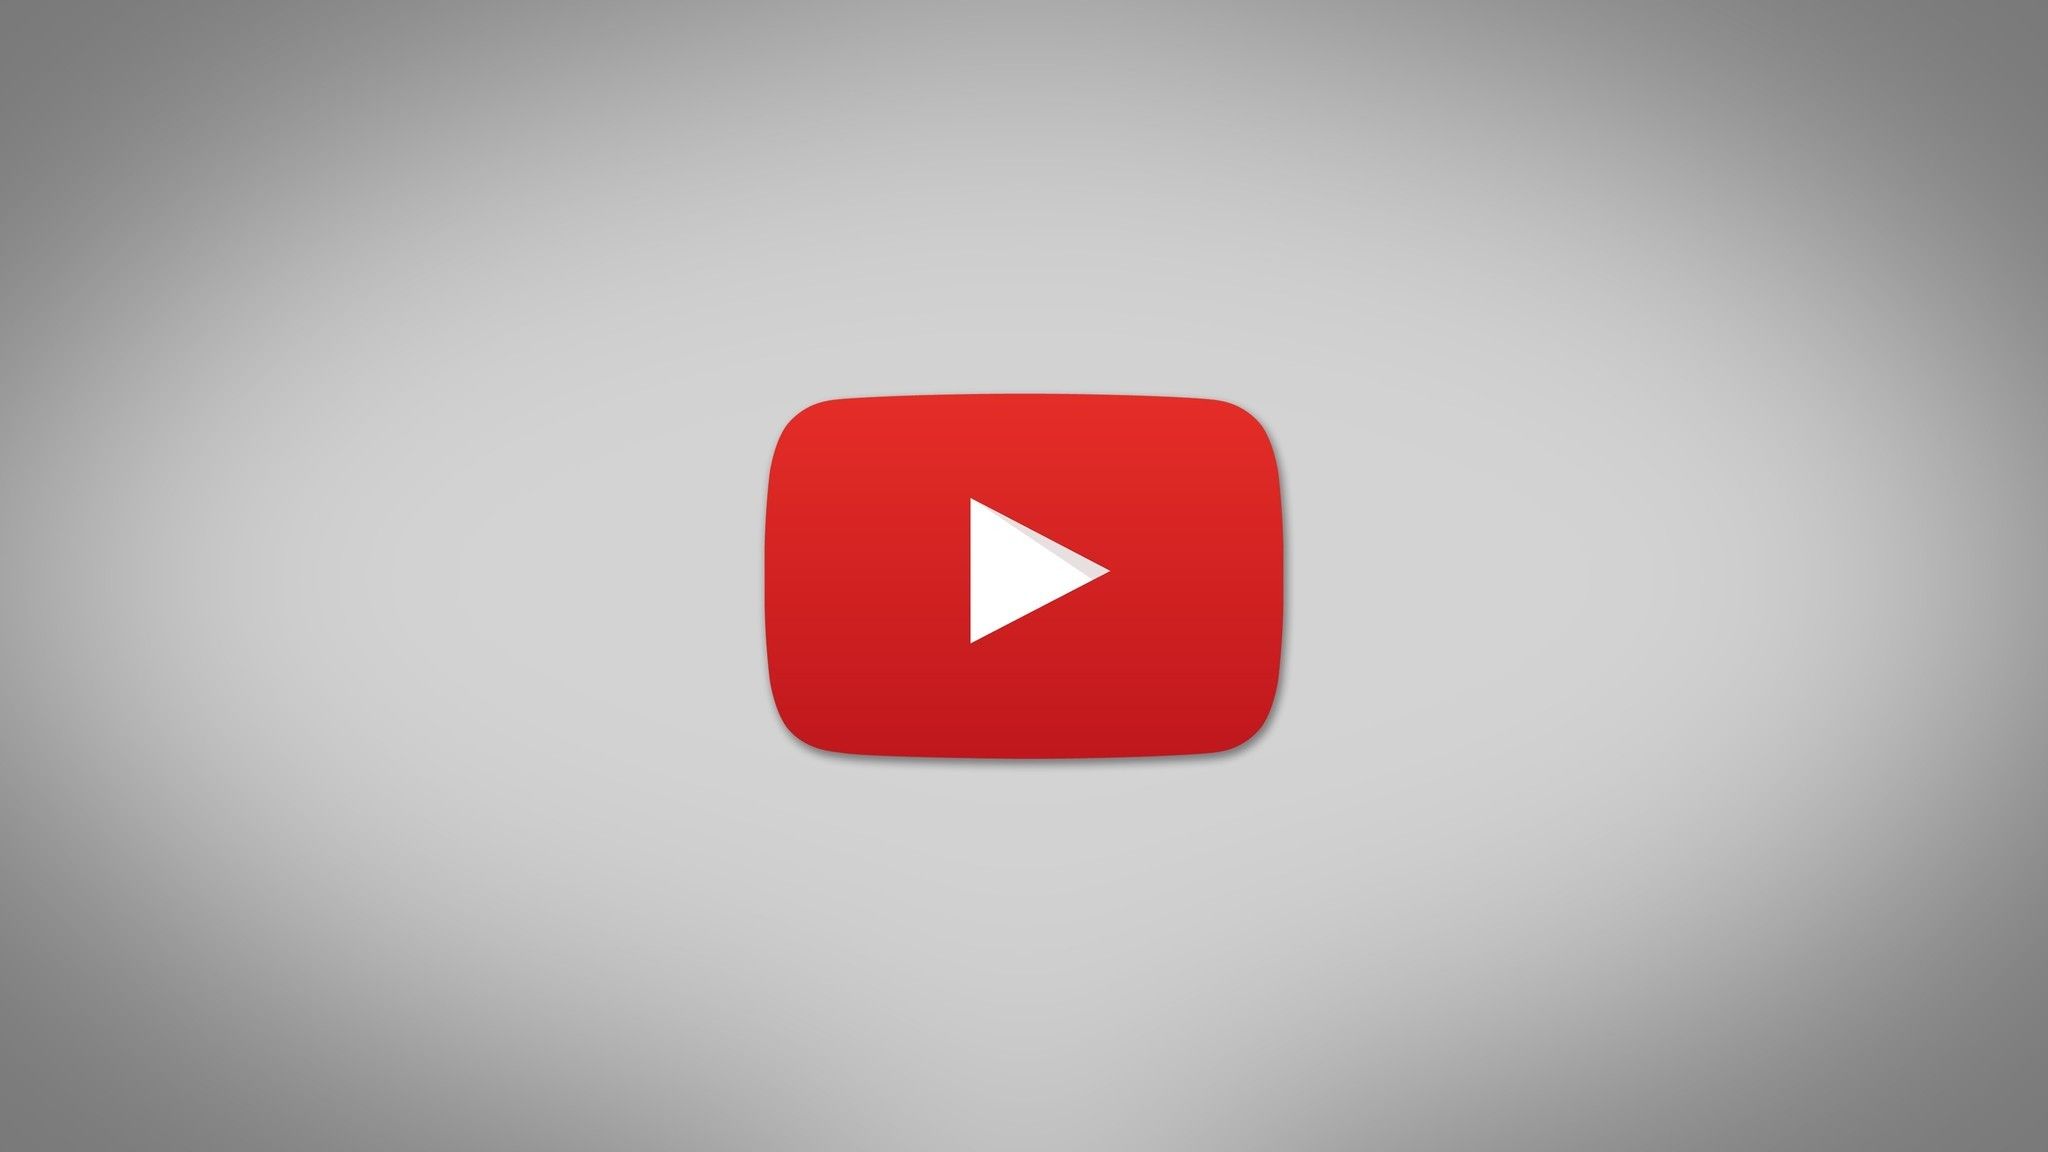 YouTube HD Wallpapers on WallpaperDog